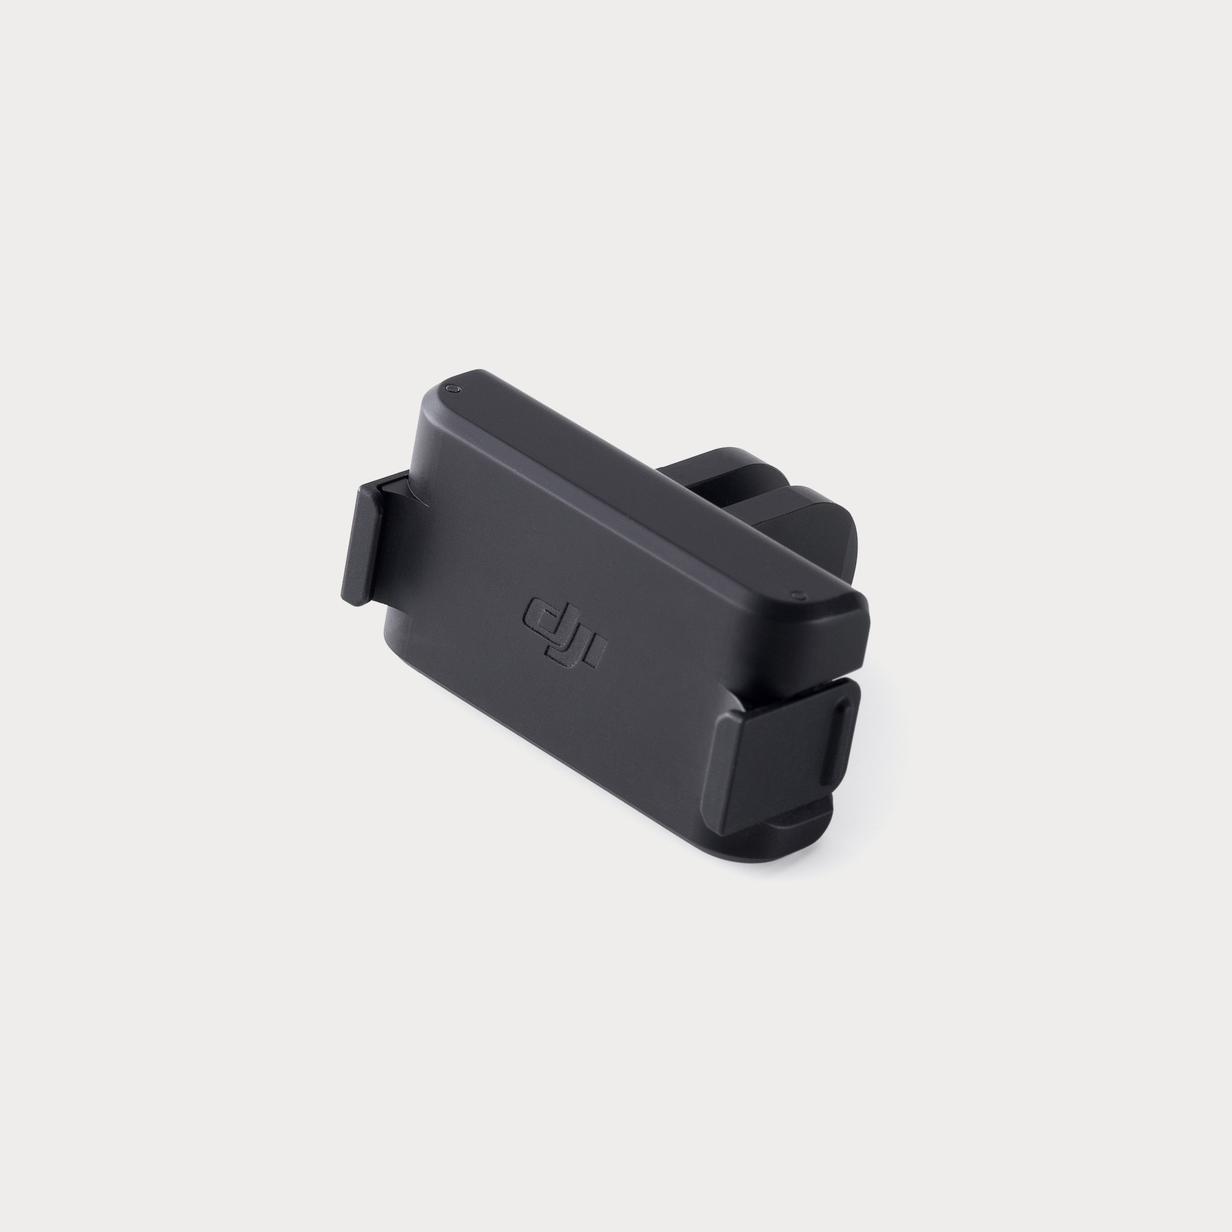 Moment DJI CP OS 00000185 01 DJI Action 2 Magnetic Adapter Mount 01